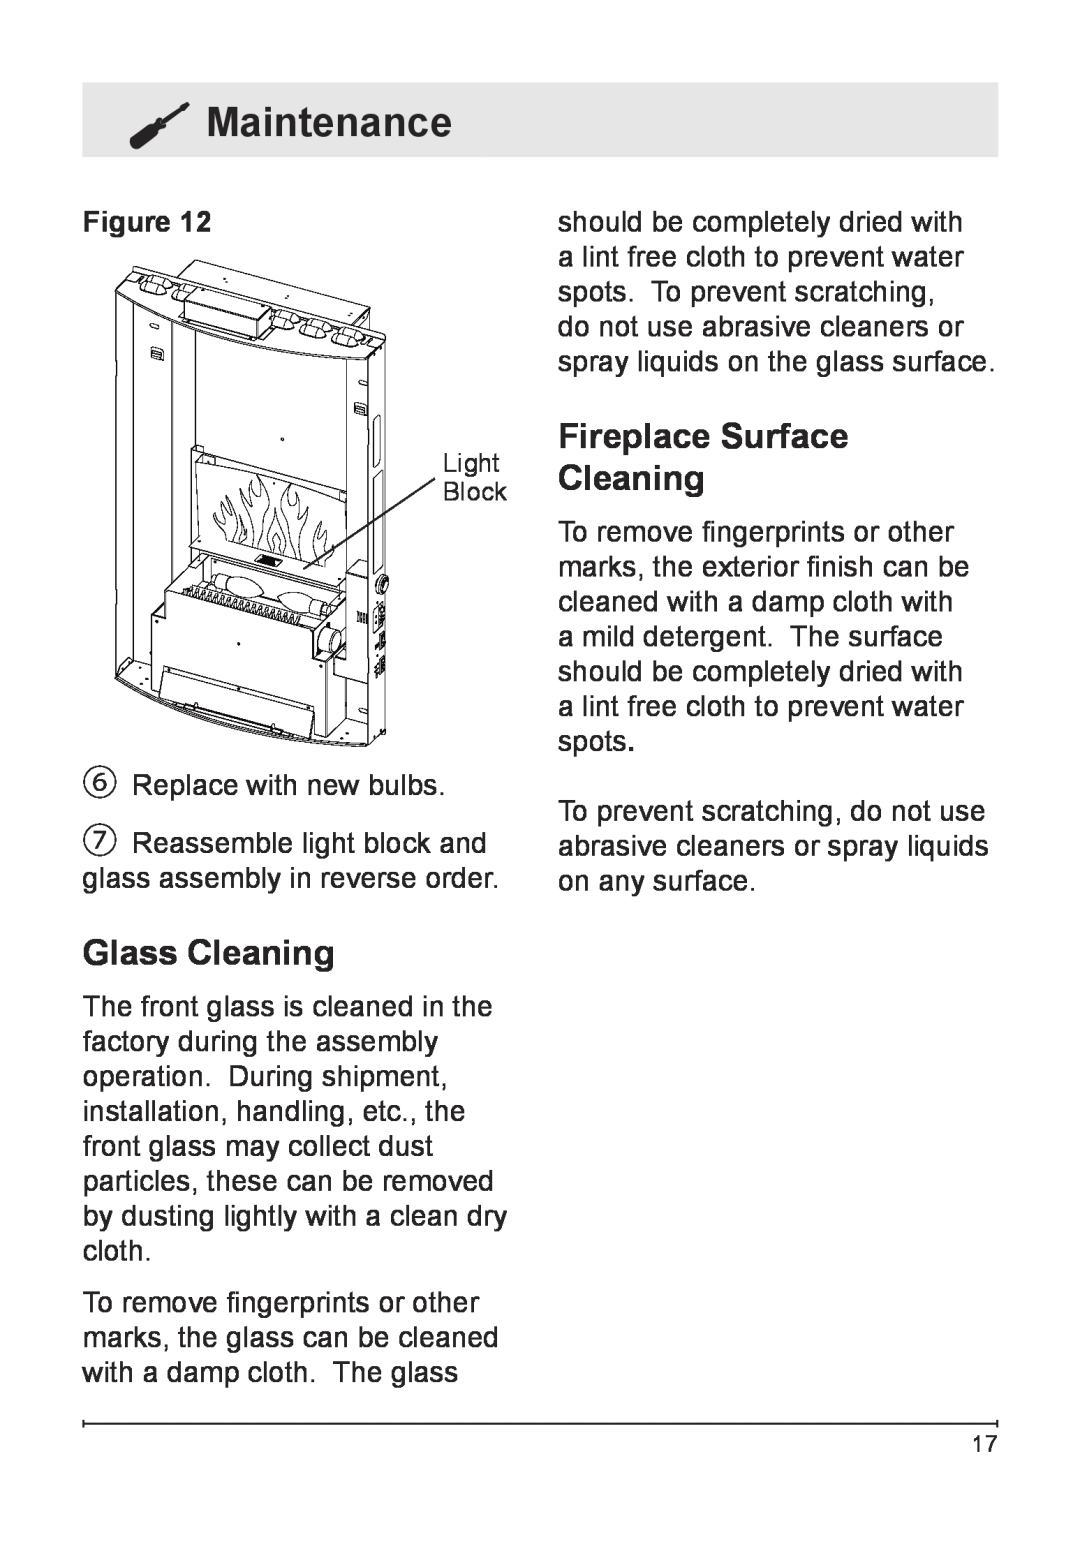 Dimplex VCX1525-WH owner manual Glass Cleaning, Fireplace Surface Cleaning, Maintenance 